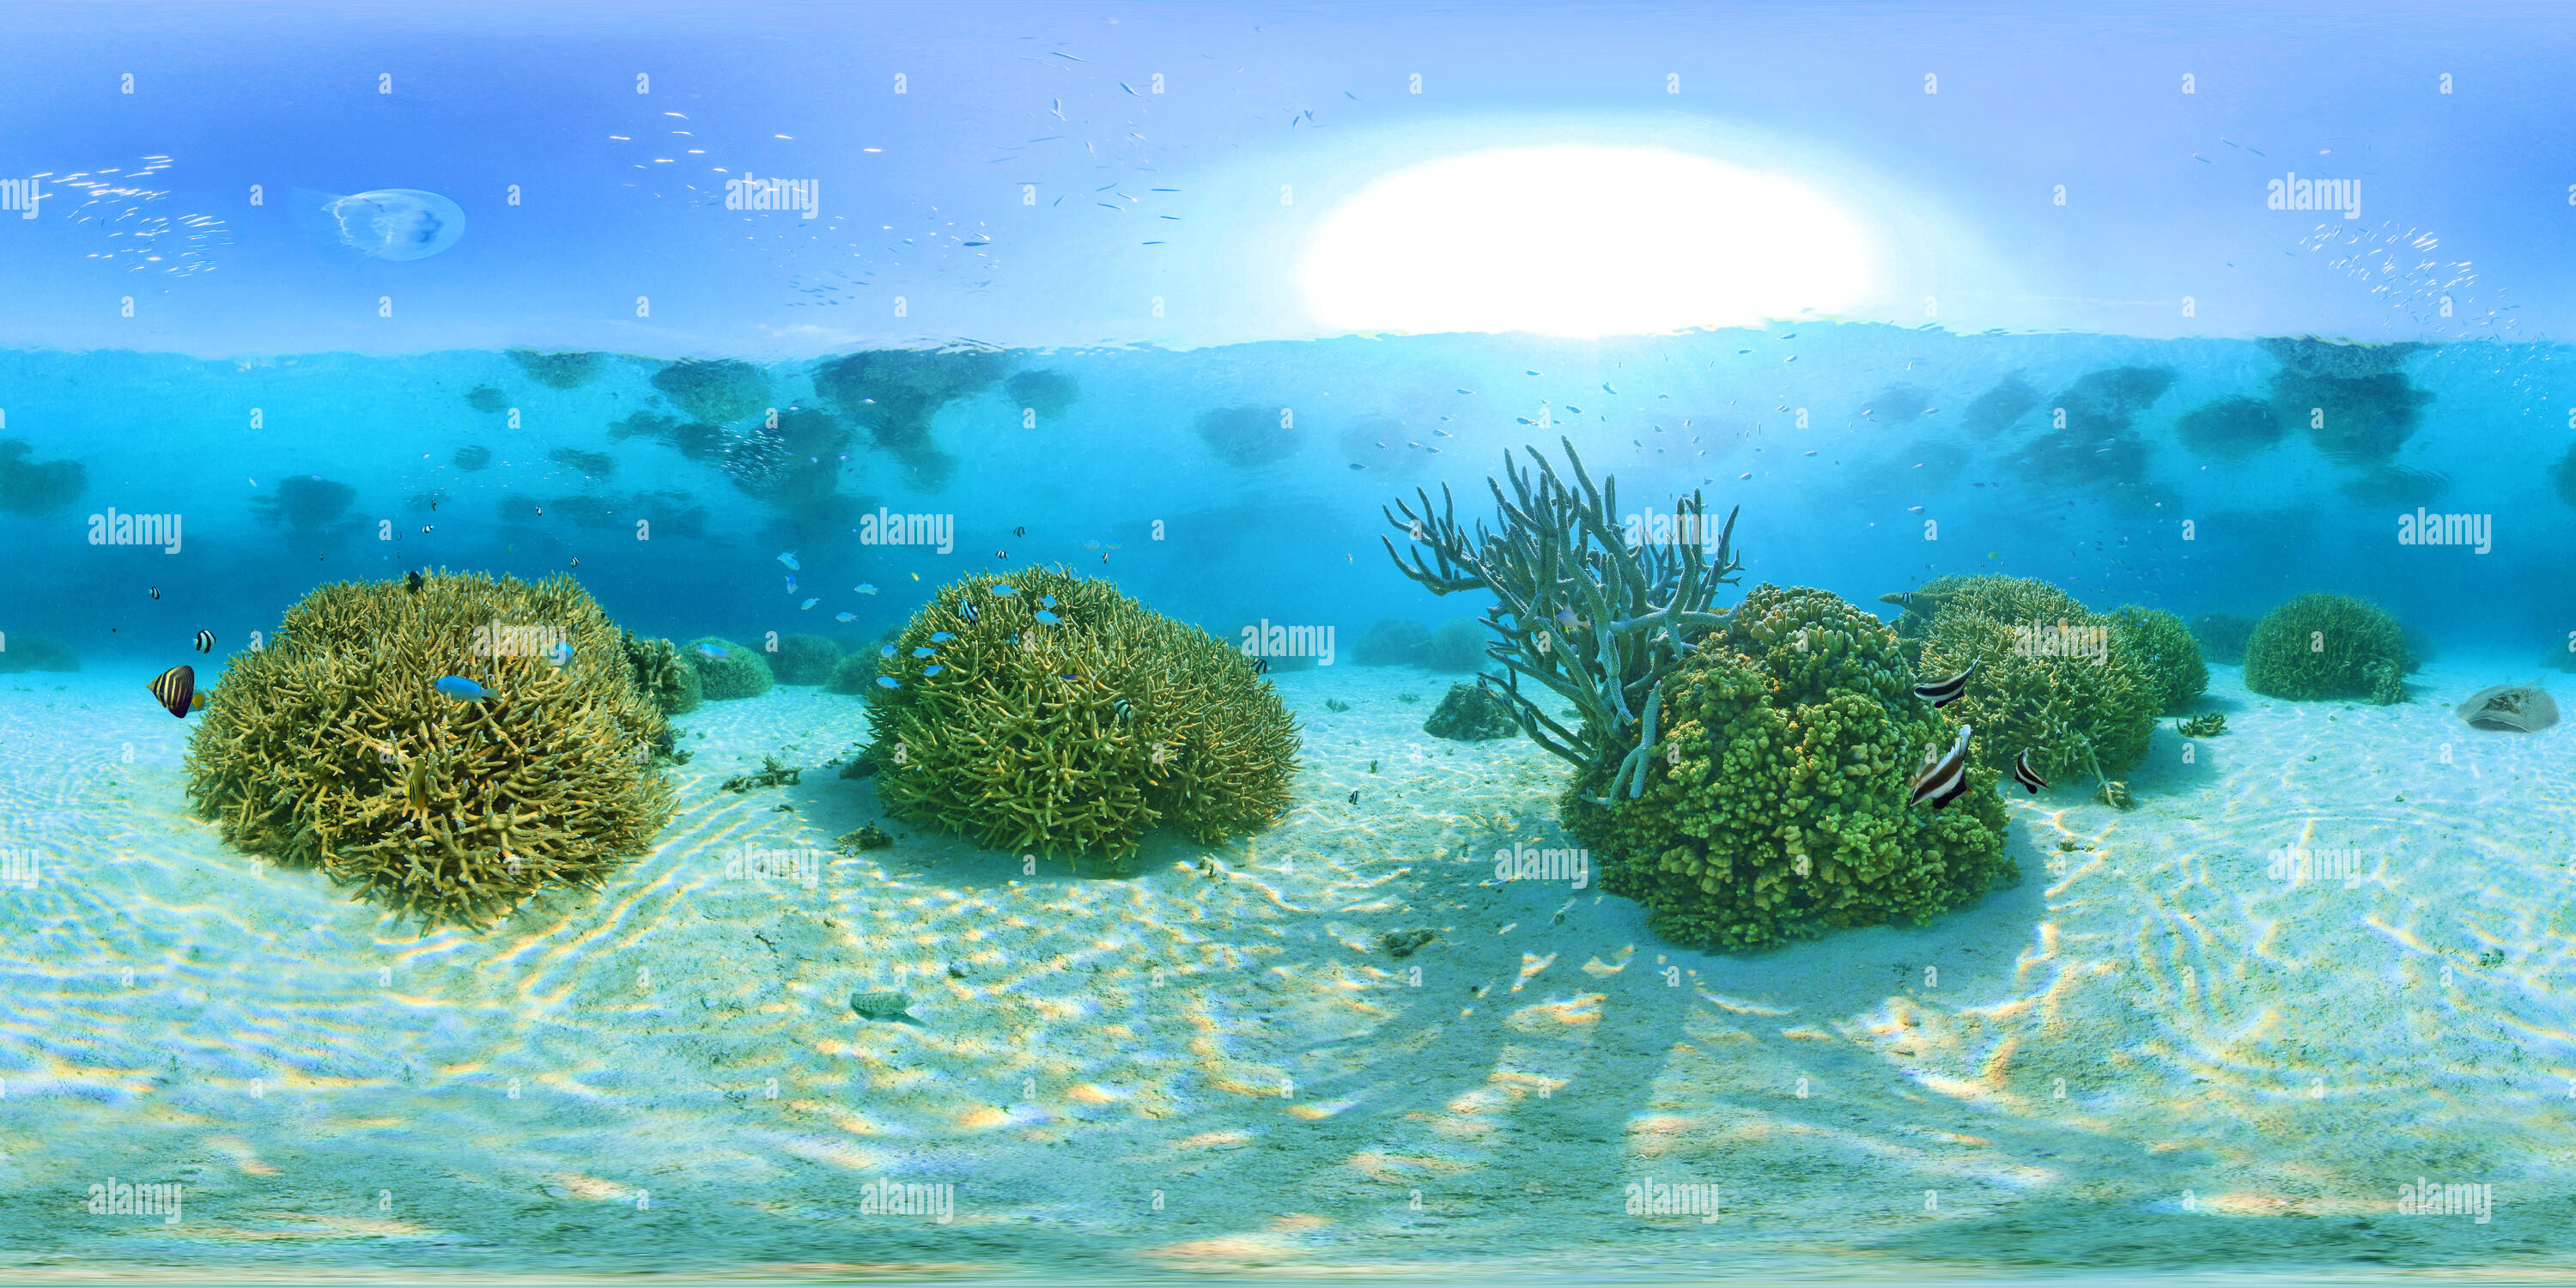 360 degree panoramic view of Coral Reef Nursery New Caledonia